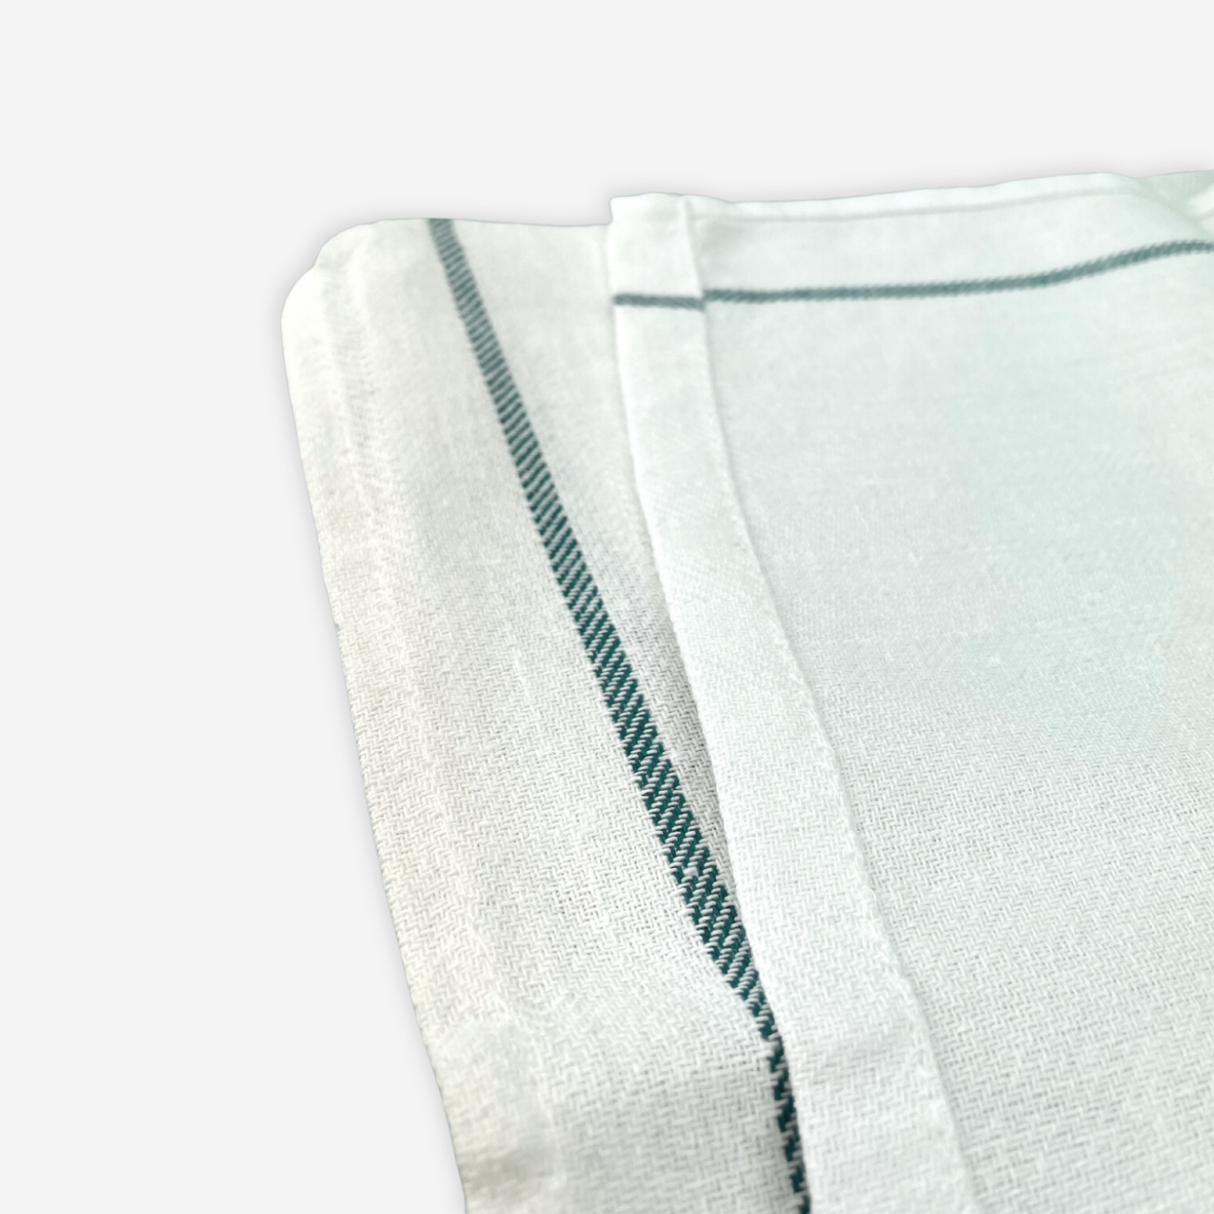 Close up view on a white bleached kitchen towel with green side on the borders, folded on a white background.